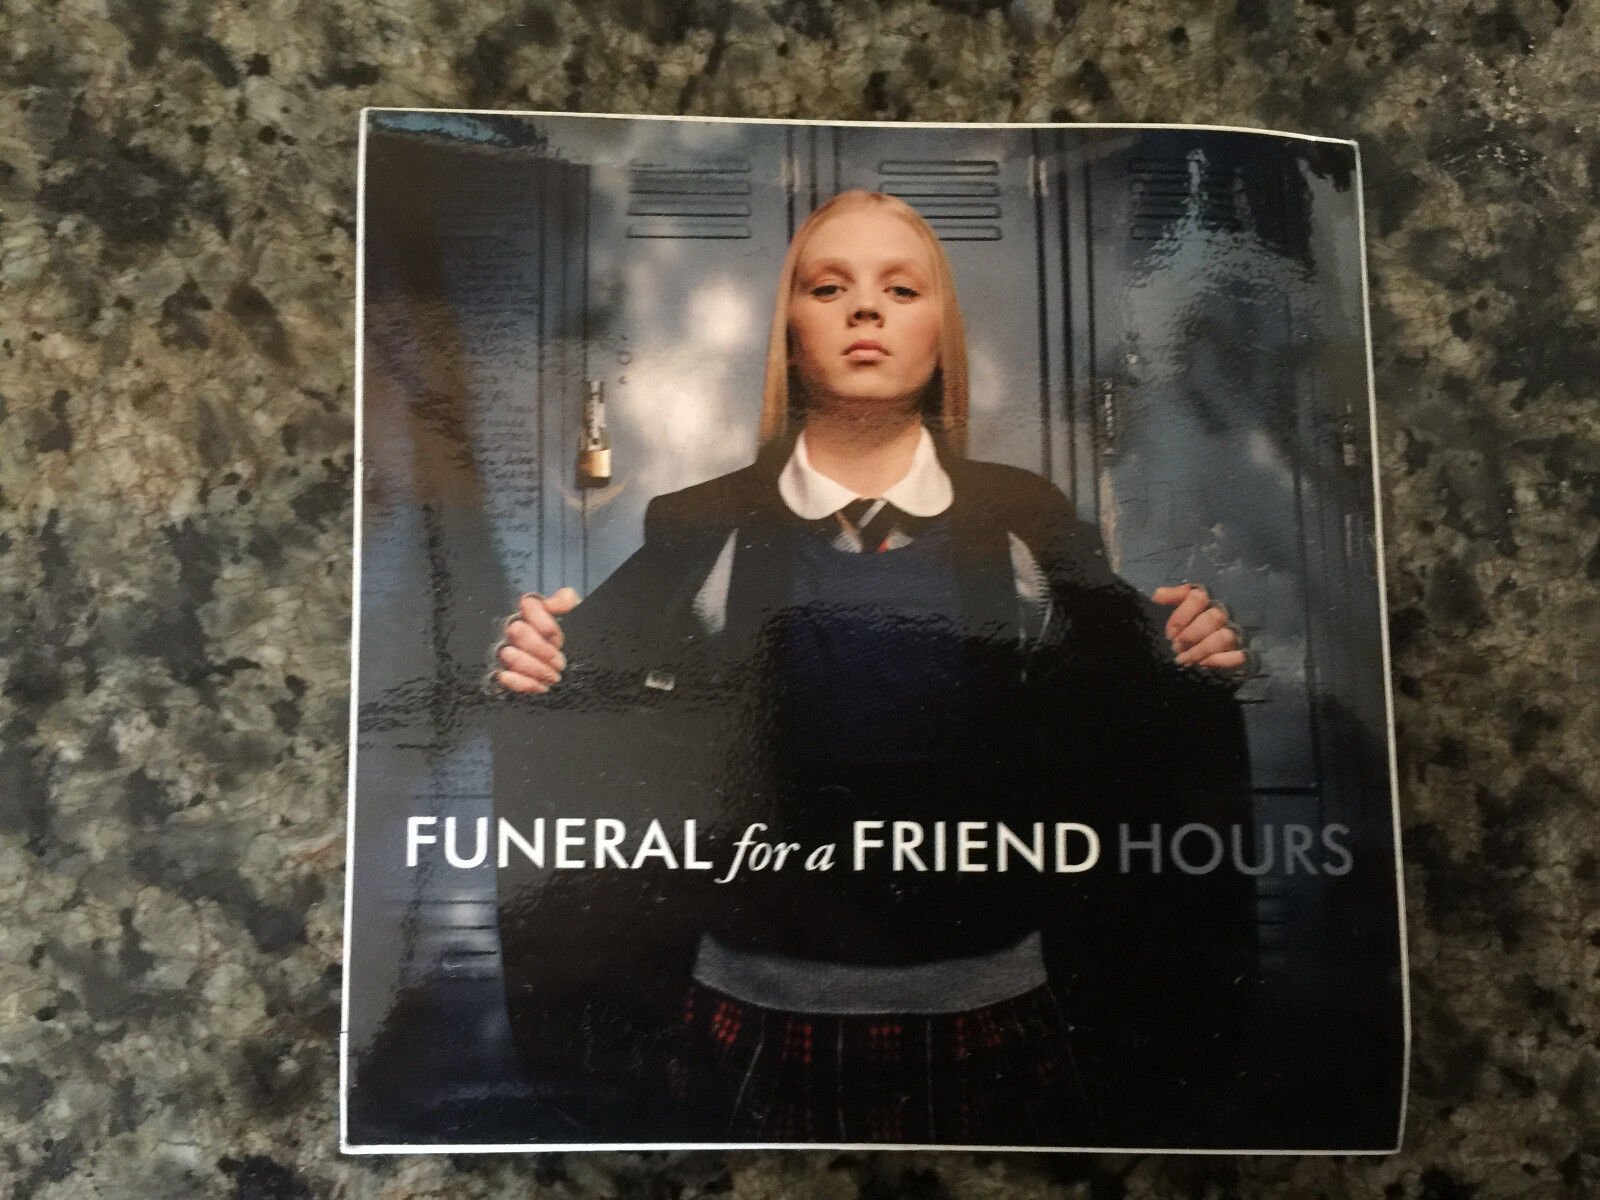 Funeral for a Friend sticker promo for cd Hours